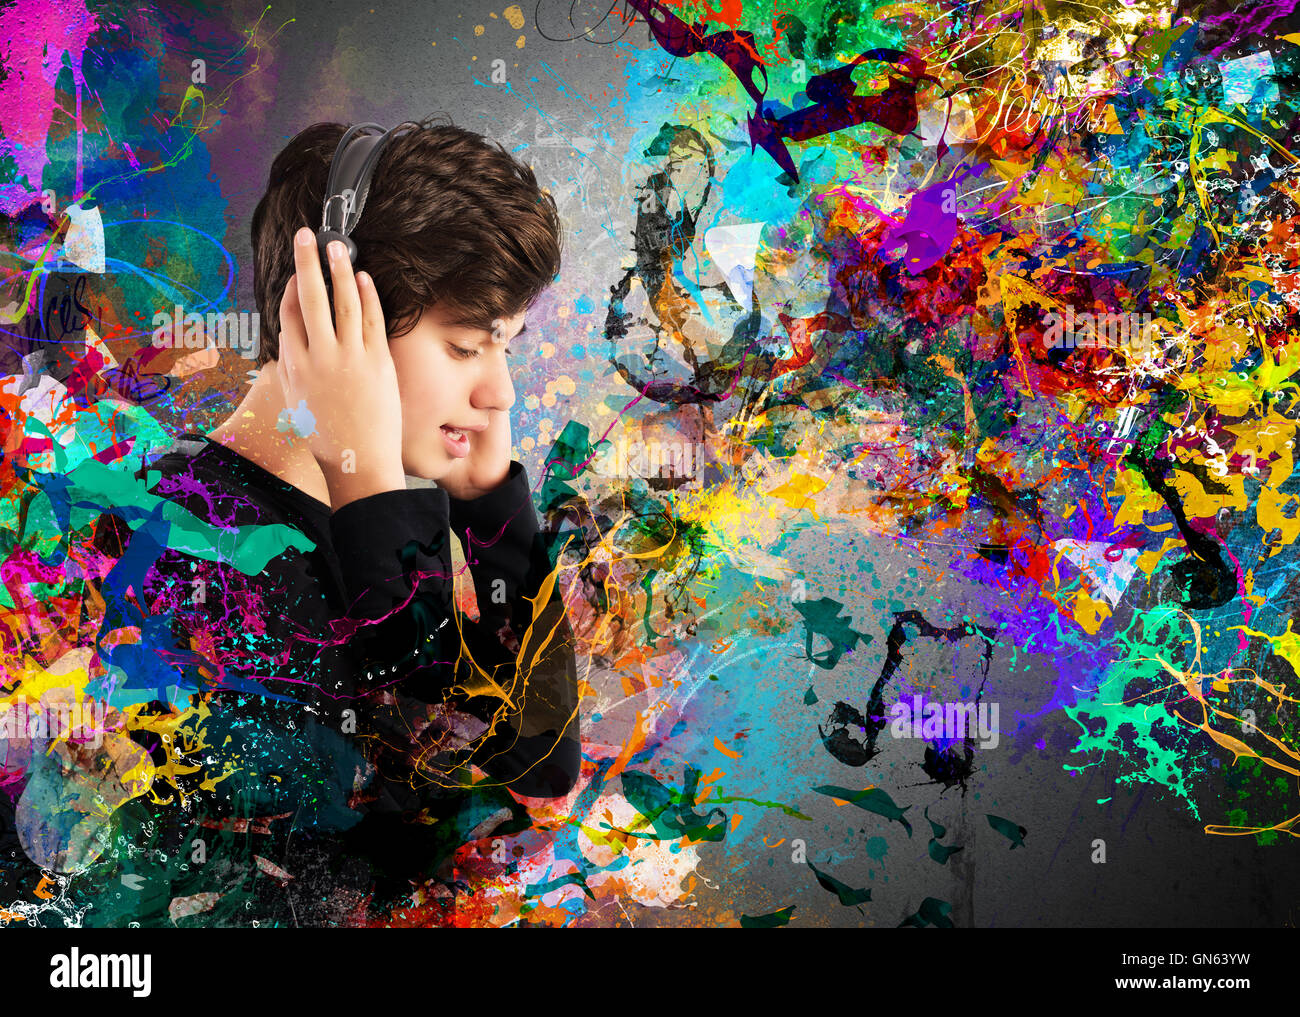 Colourful music passion Stock Photo